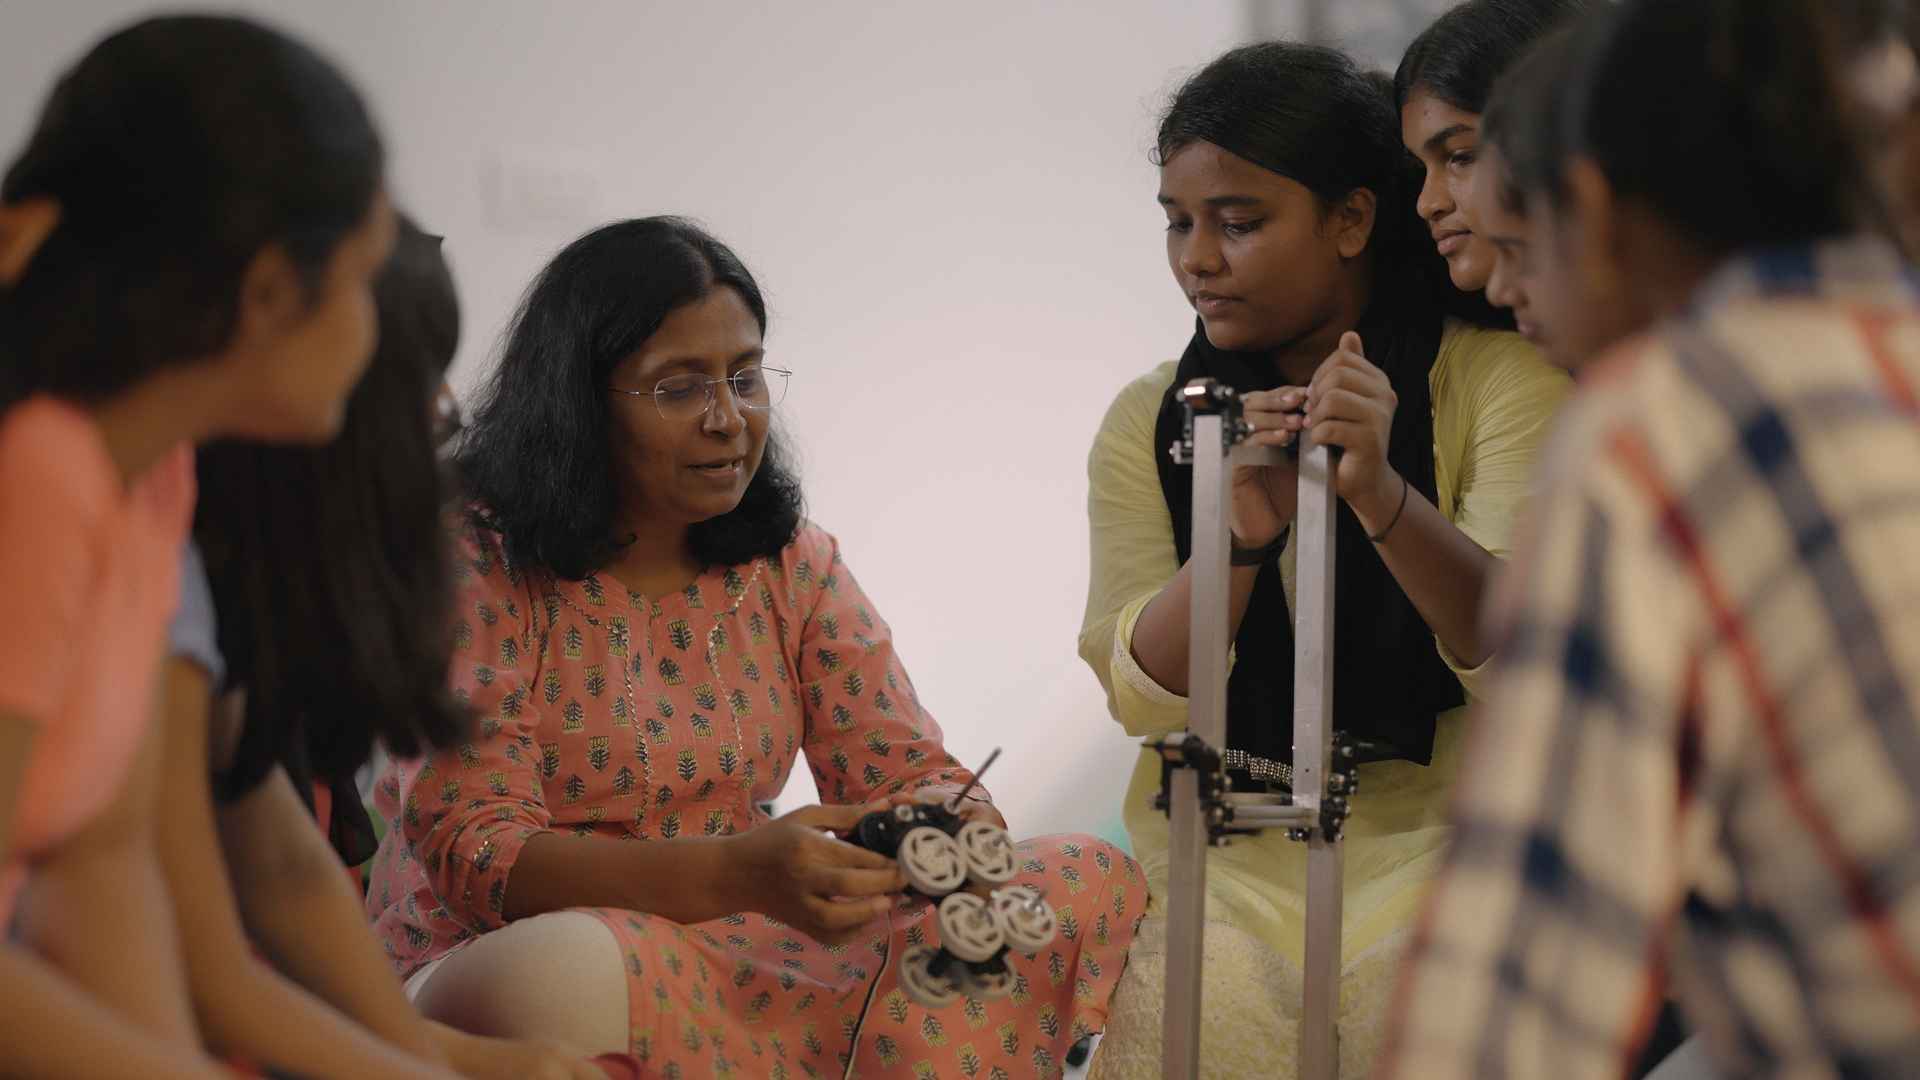 Meenal Majumder of The Innovation Story working with the children in their quest to build the robot